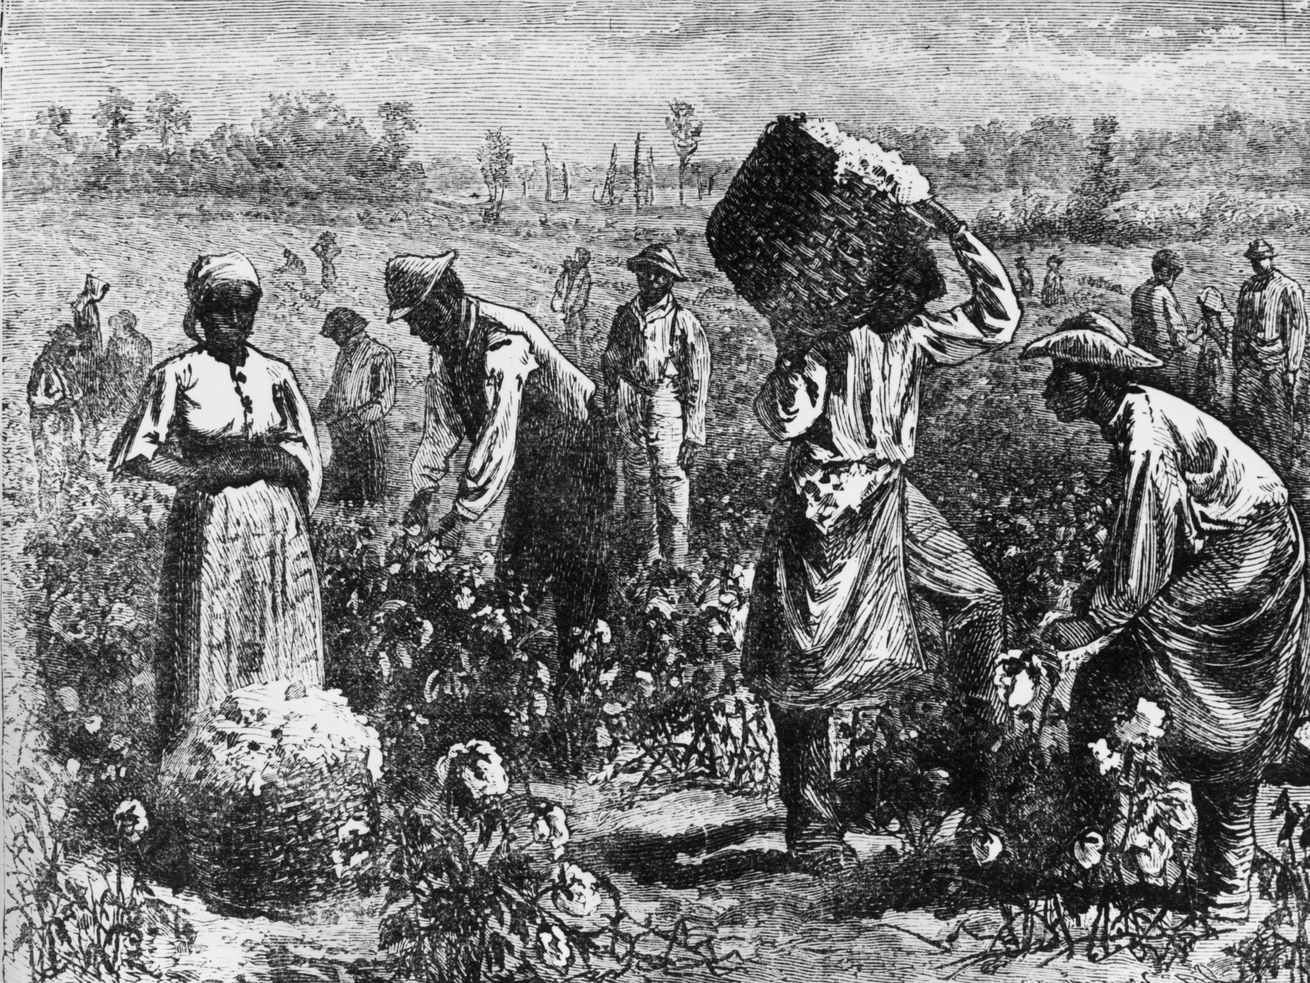 Clint Smith III on confronting slavery’s legacy in America